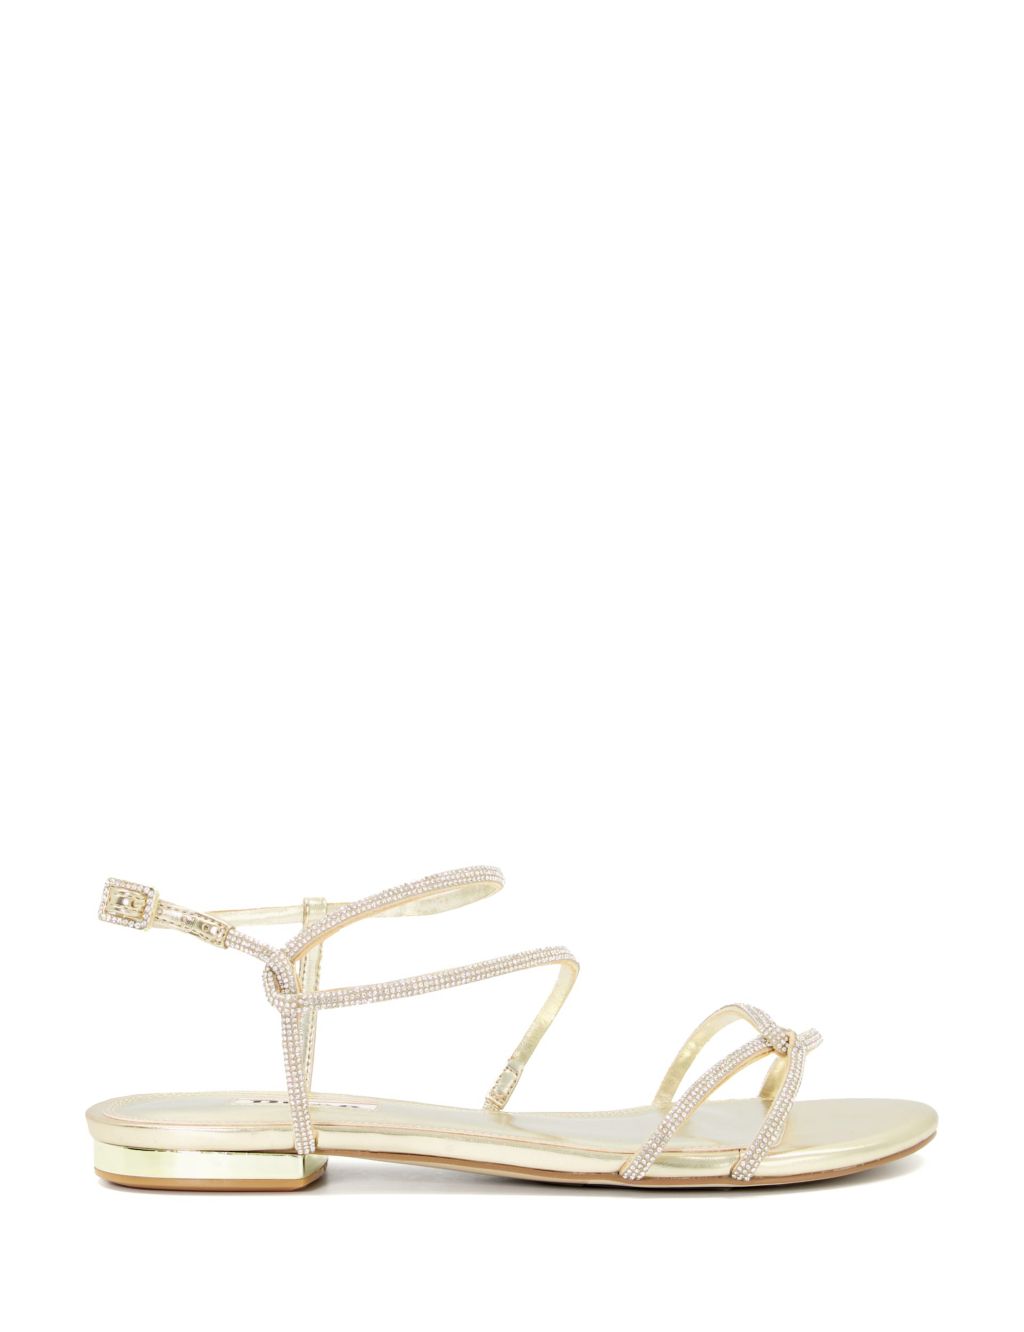 Sparkle Strappy Flat Sandals image 1